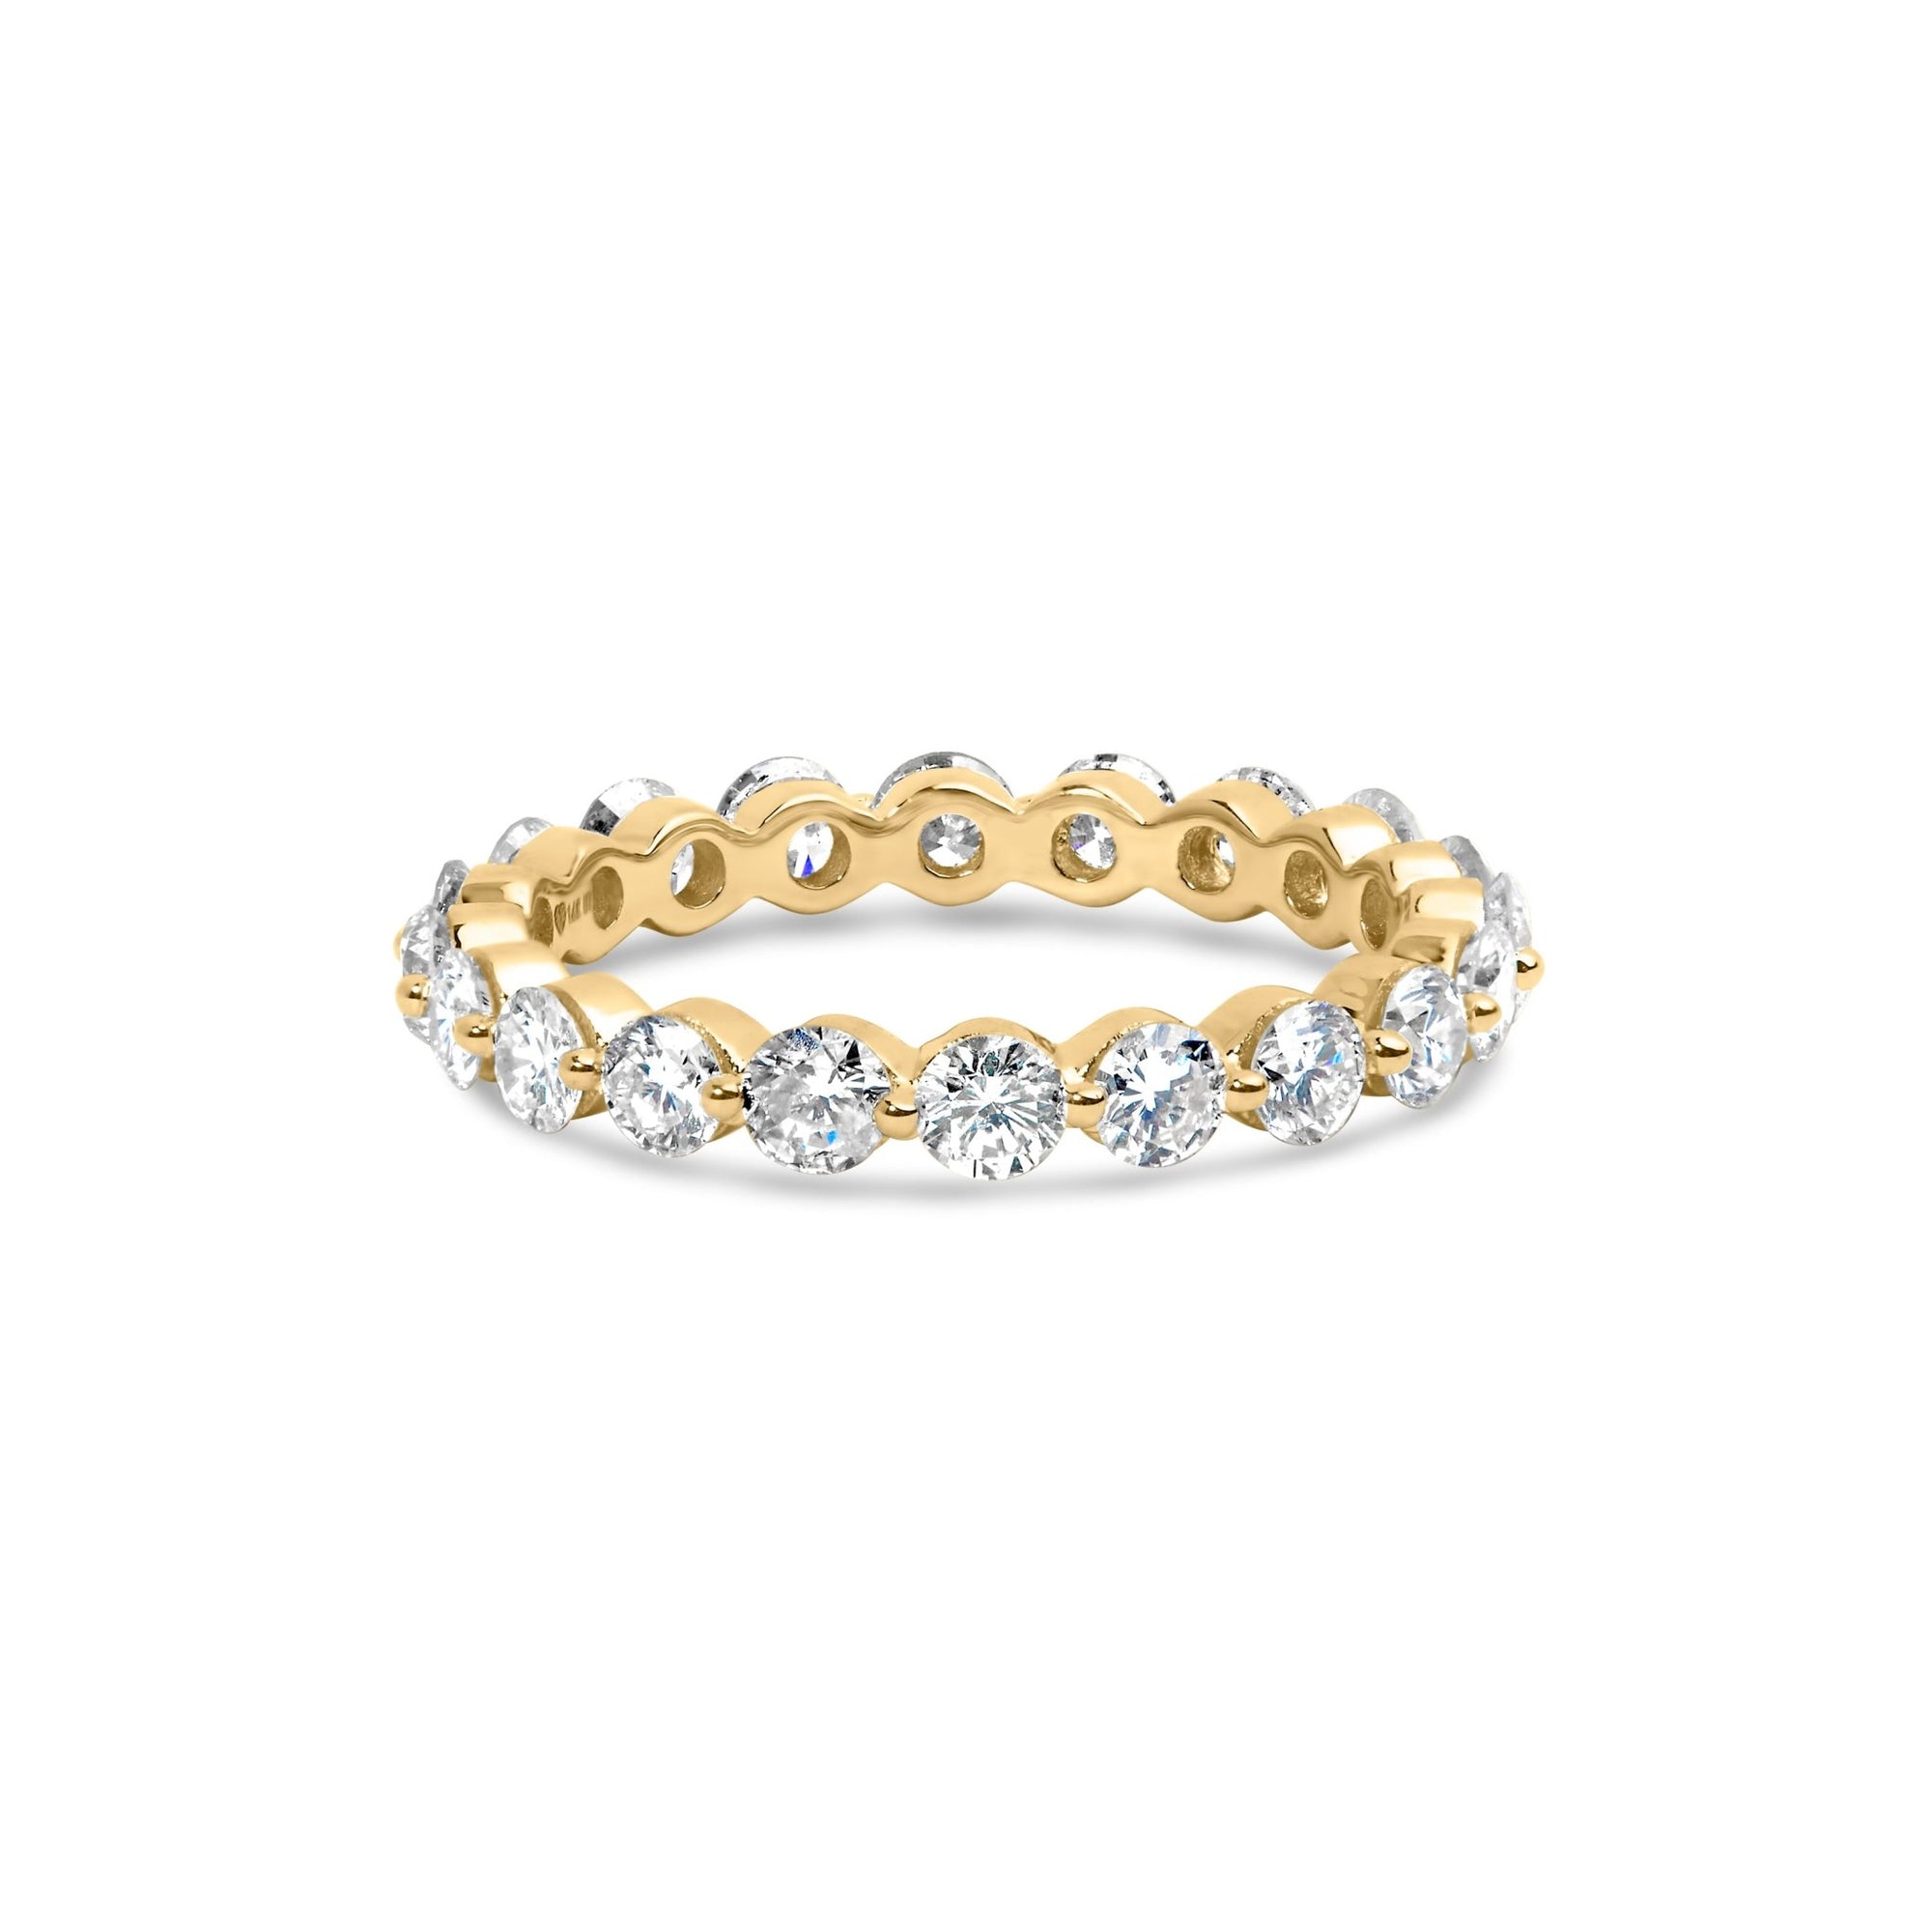 14K Yellow Gold 2.0 Cttw 2 Prong Set Diamond Eternity Band Ring (SI1-SI2 Clarity, I-J Color) - Ring Size 7 - LinkagejewelrydesignLinkagejewelrydesign